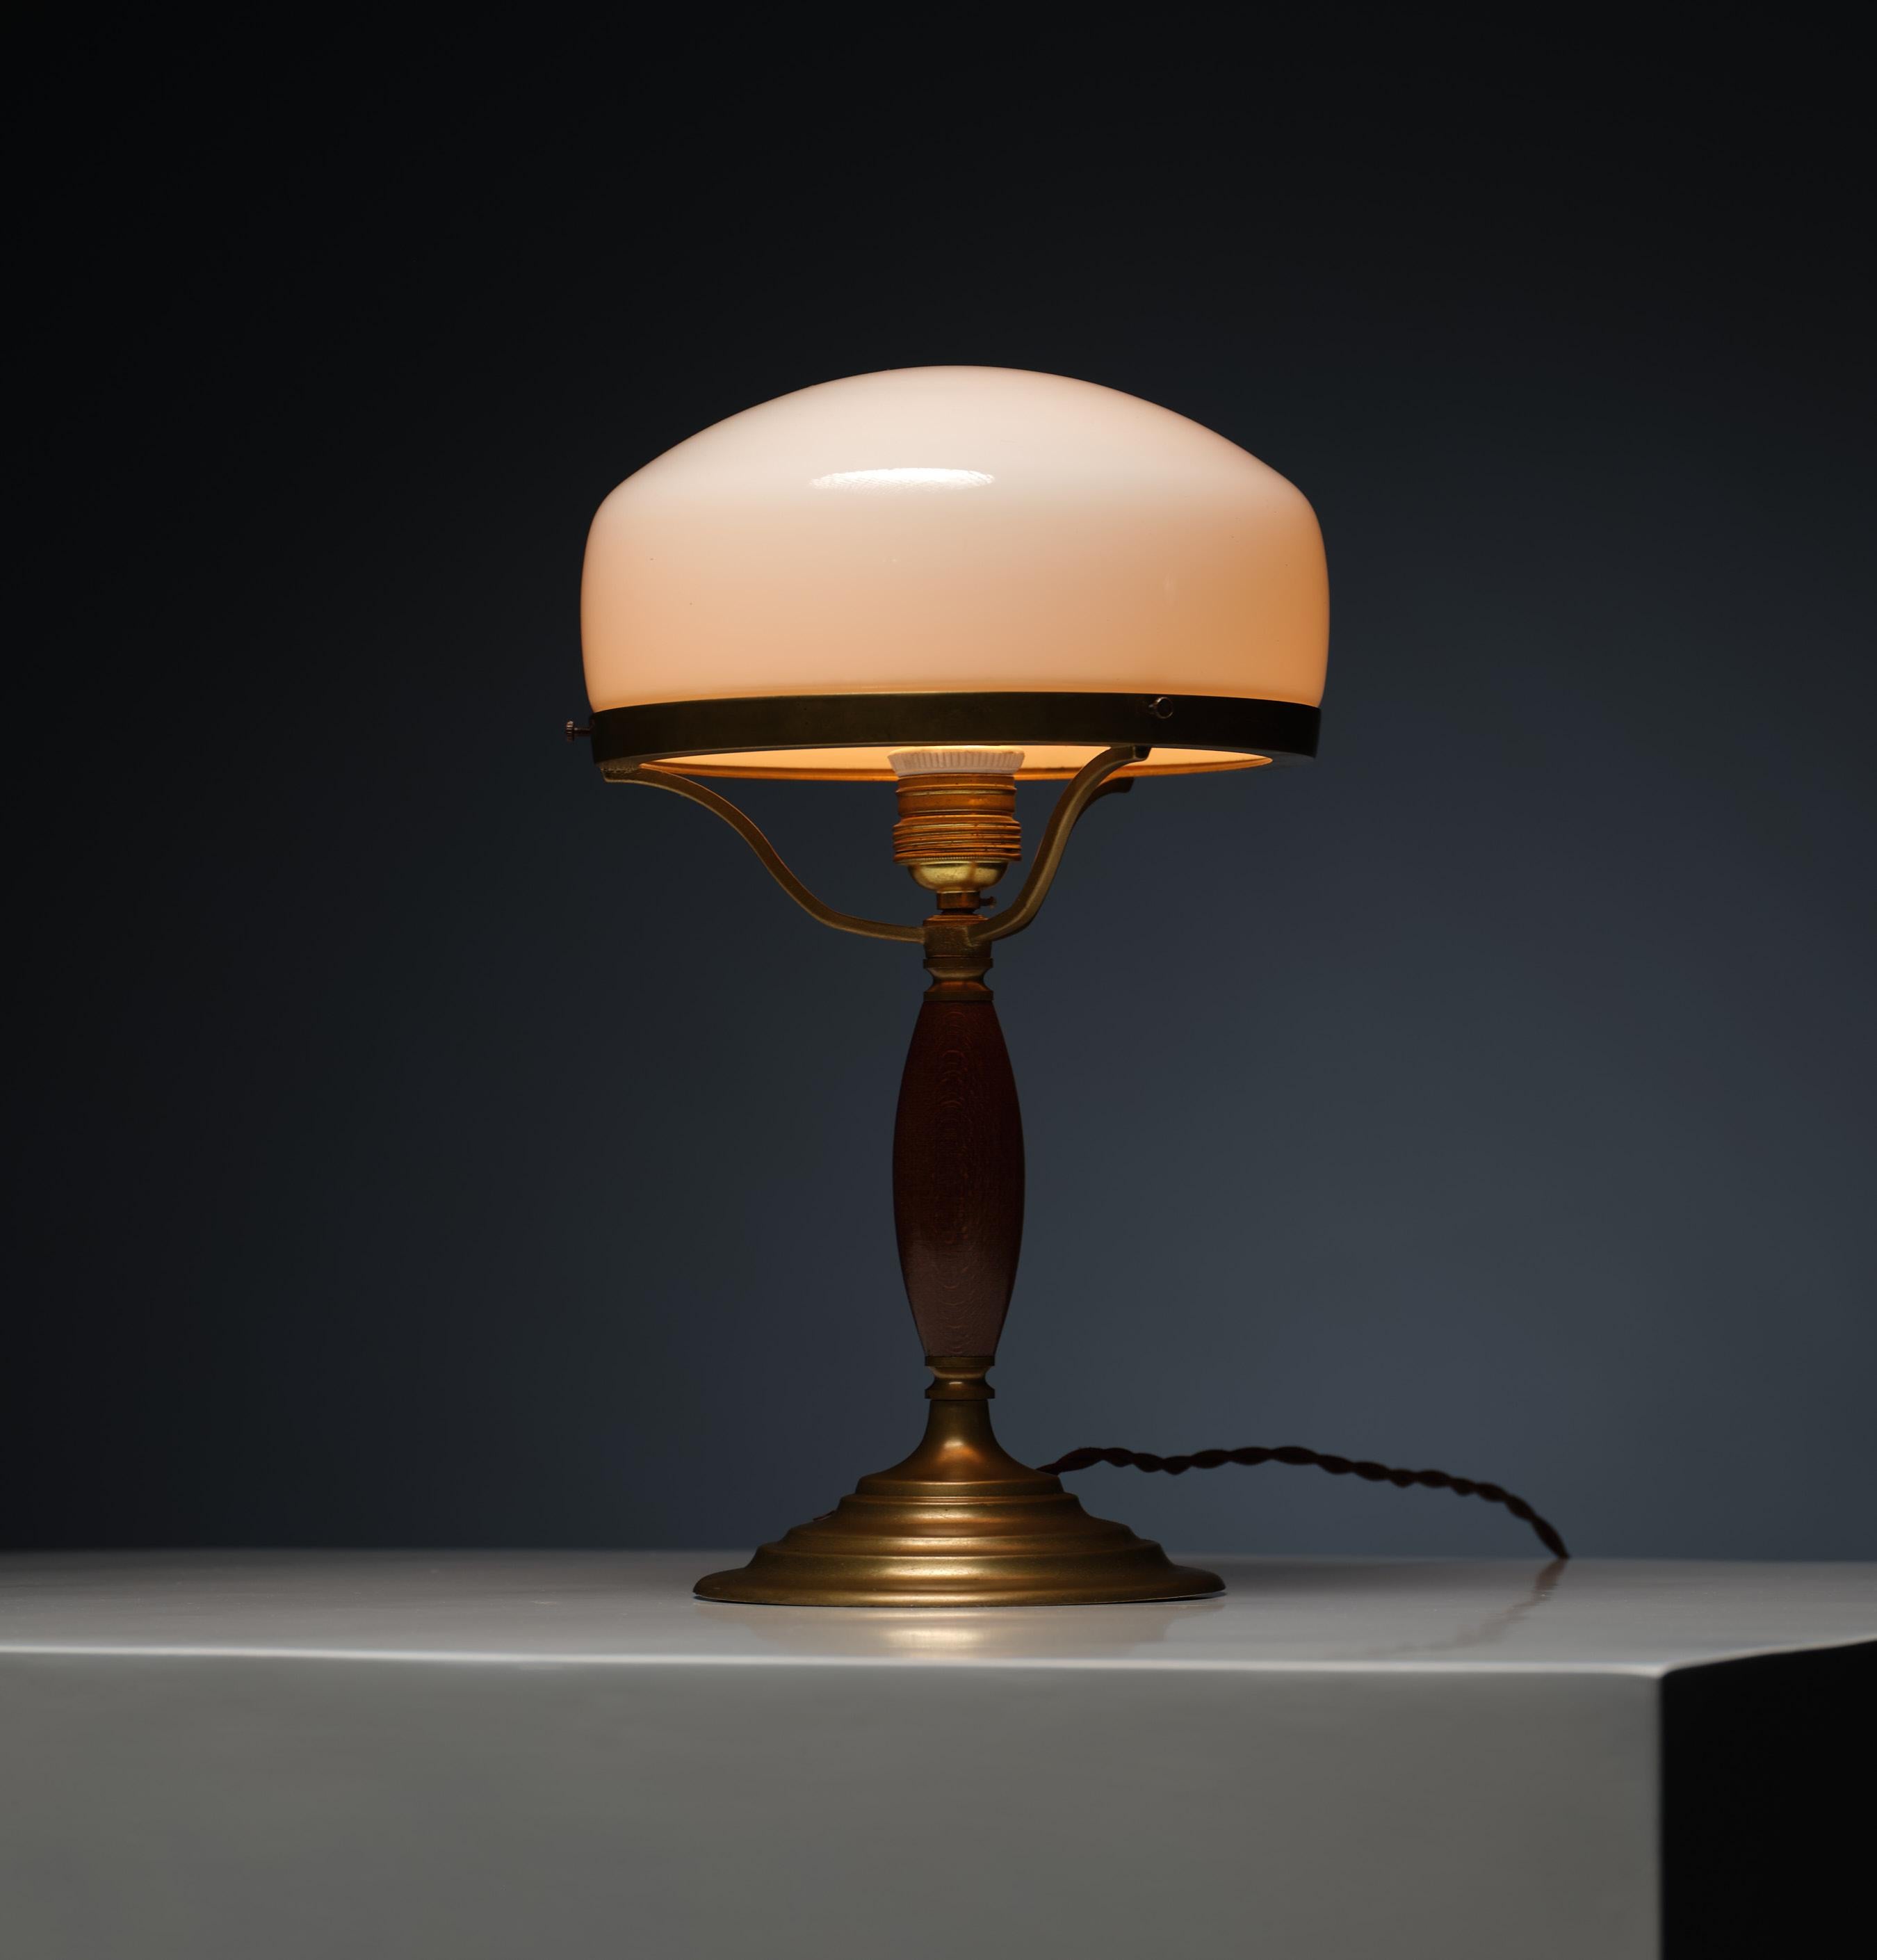 20th Century Elegant Midcentury Vintage Table Lamp - Brass Beauty with Original Patina For Sale